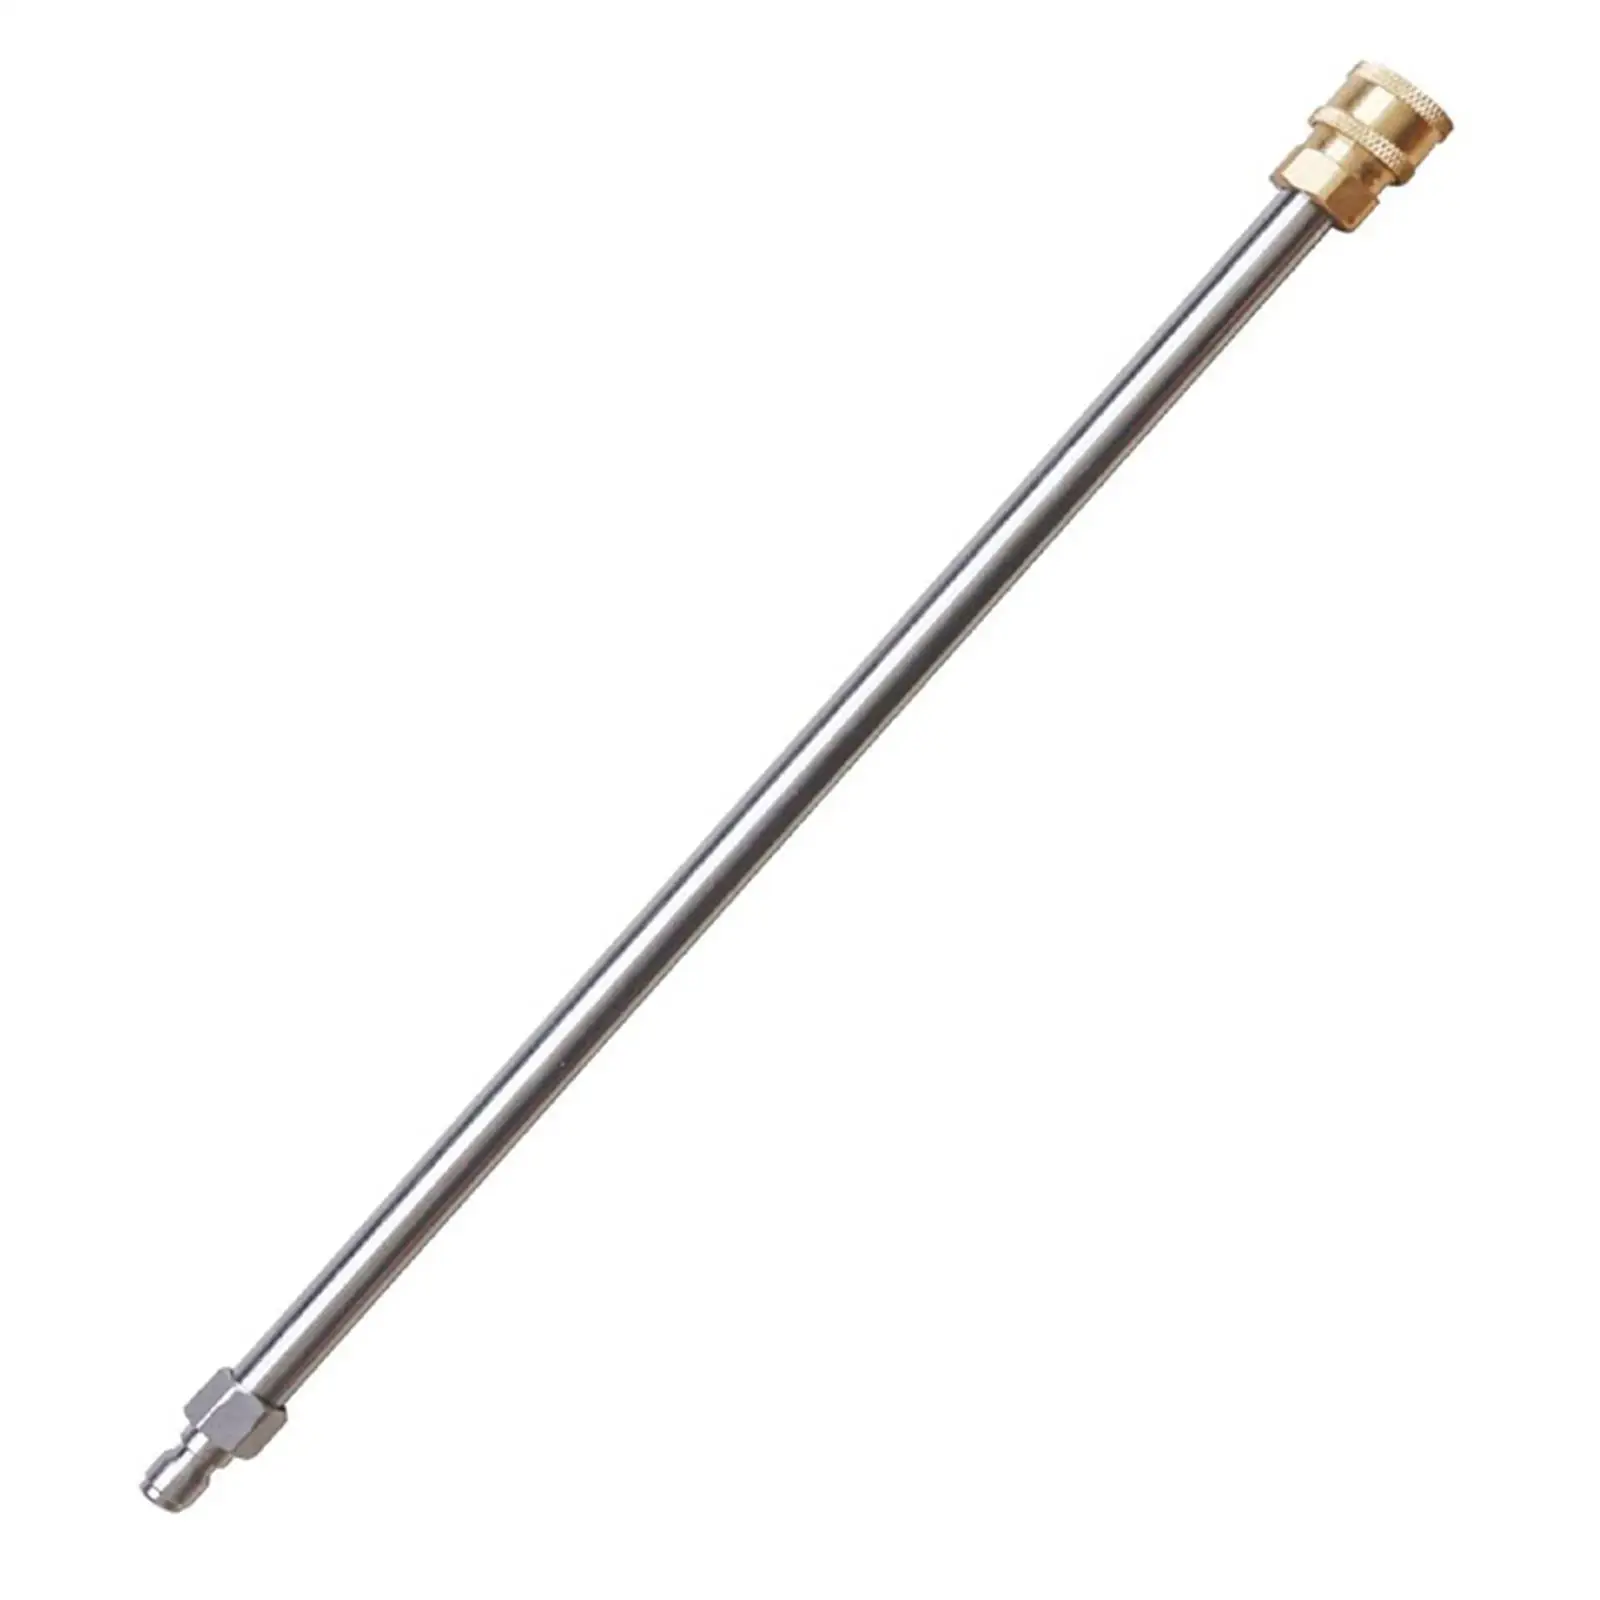 Power Washer Lance Extension Pole for Water Broom Undercarriage Cleaner Roof